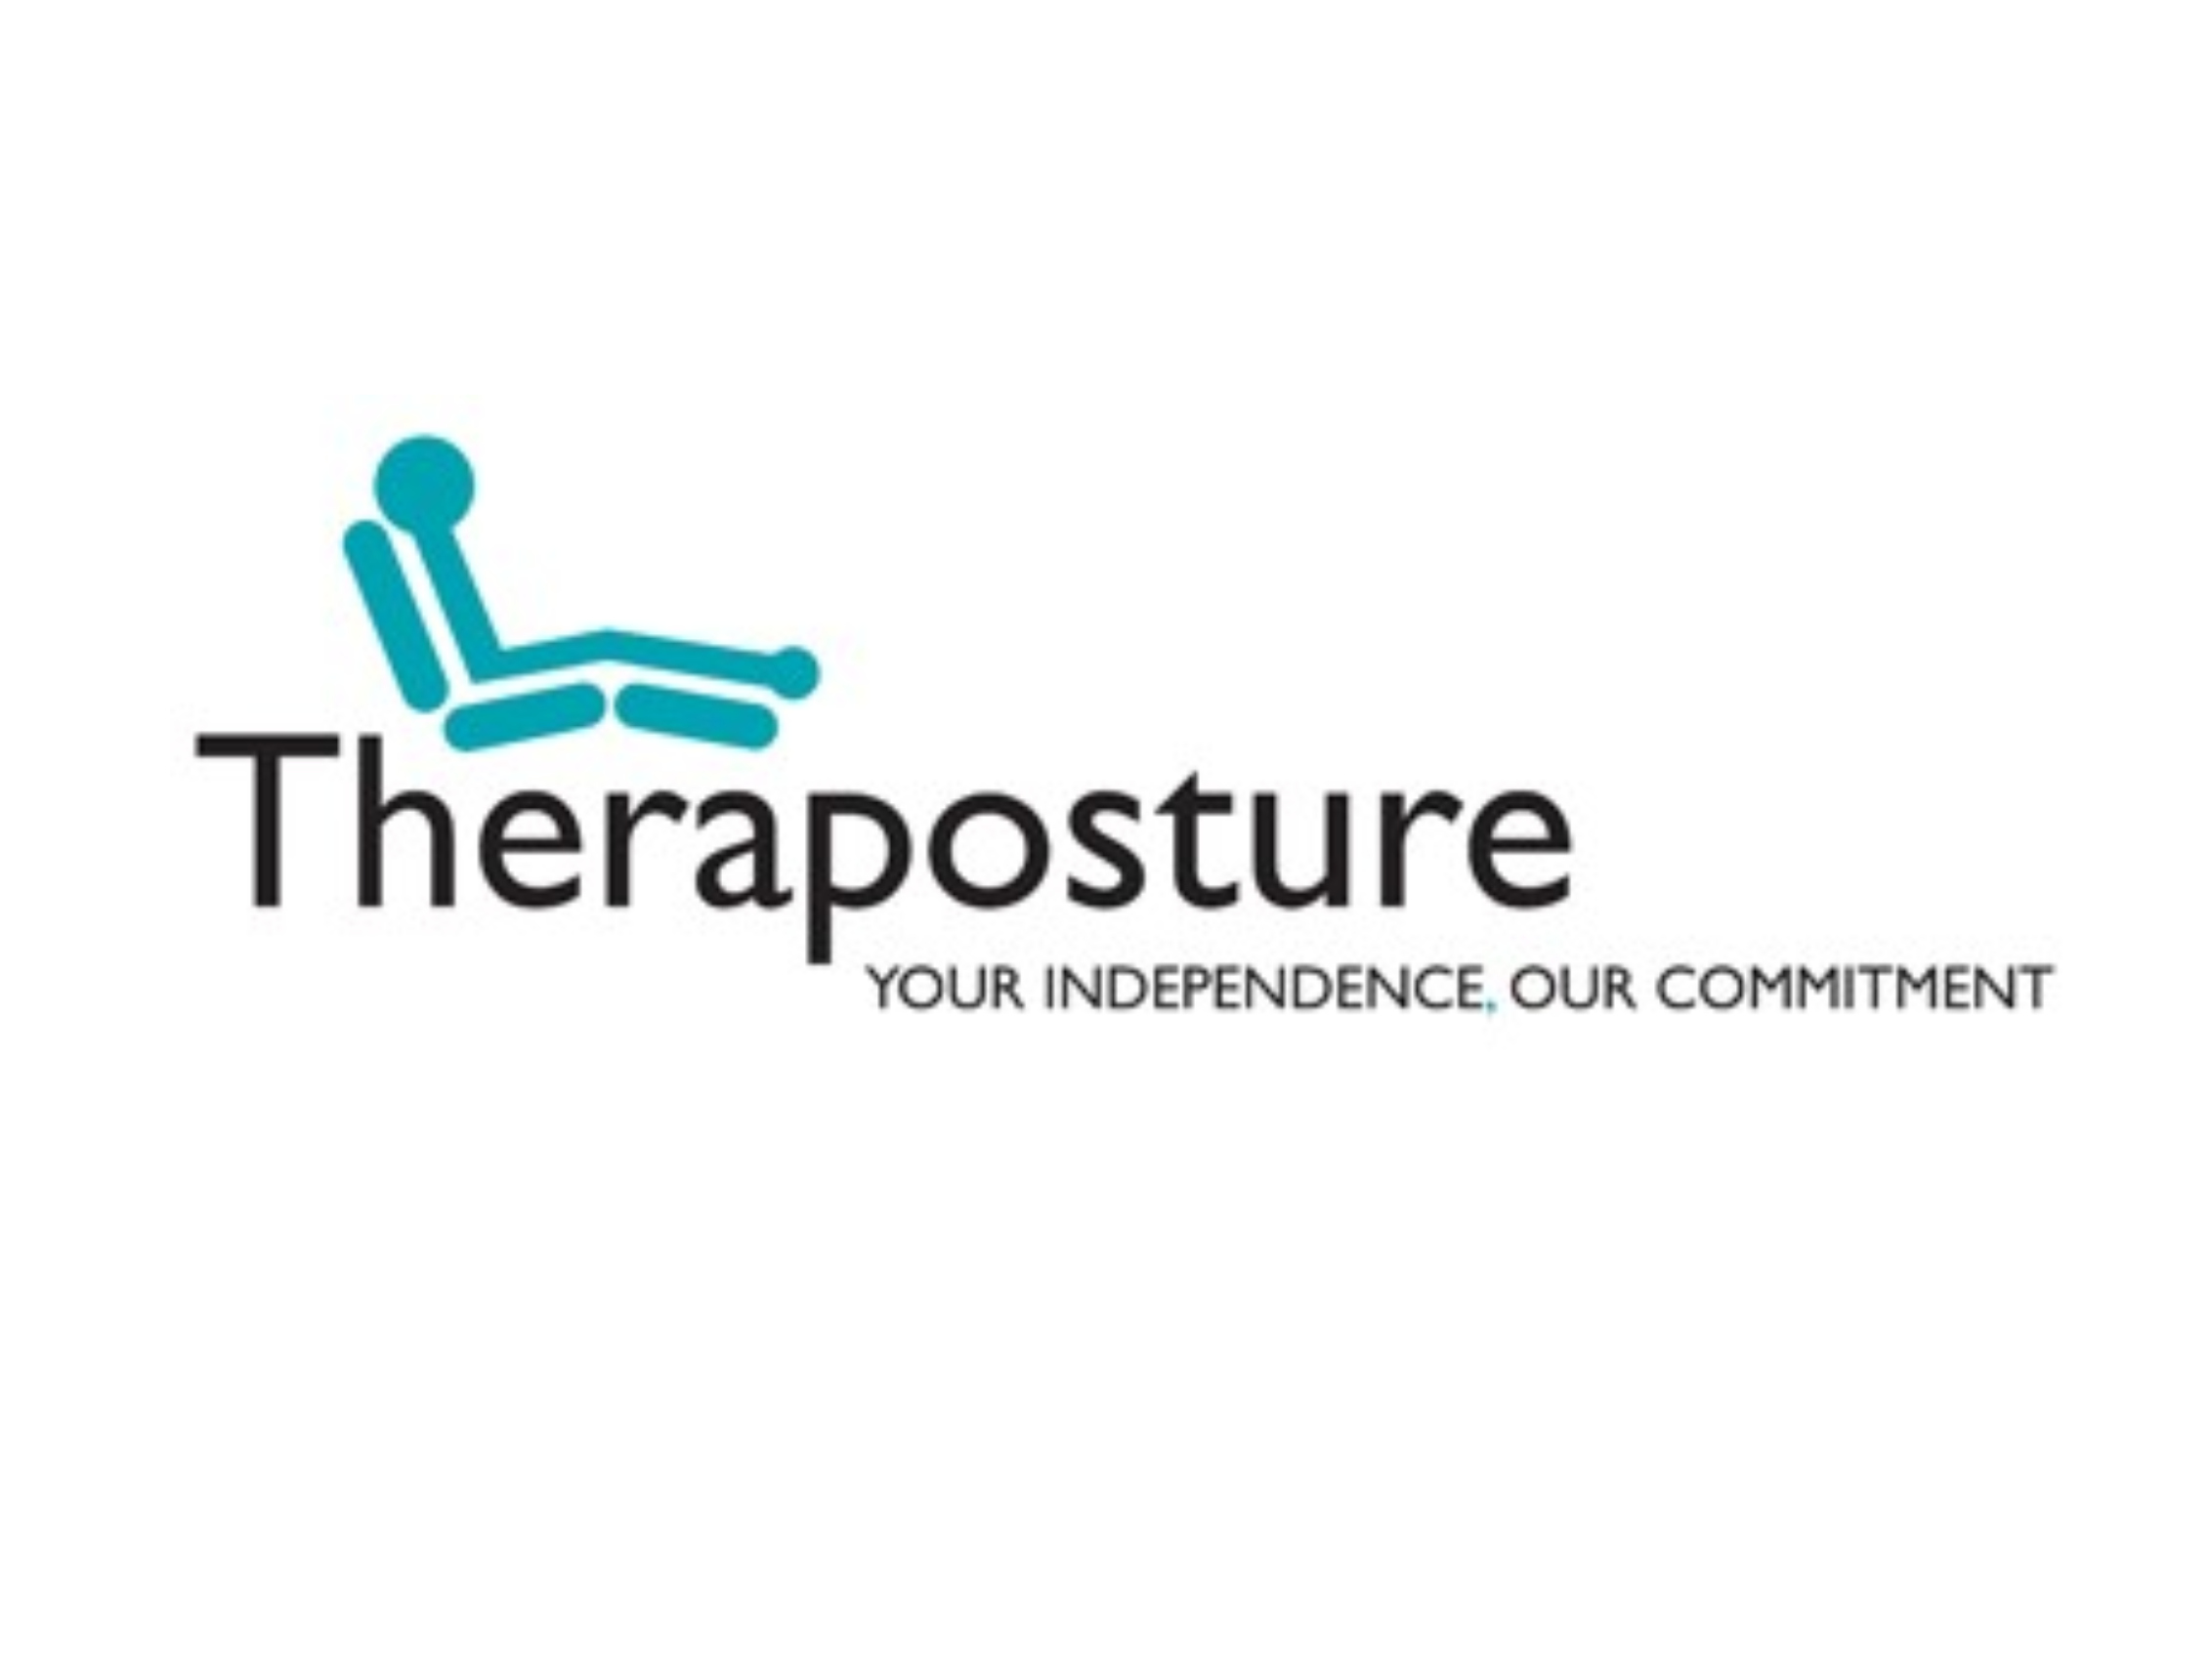 MS Society names Theraposture as new Corporate Partner